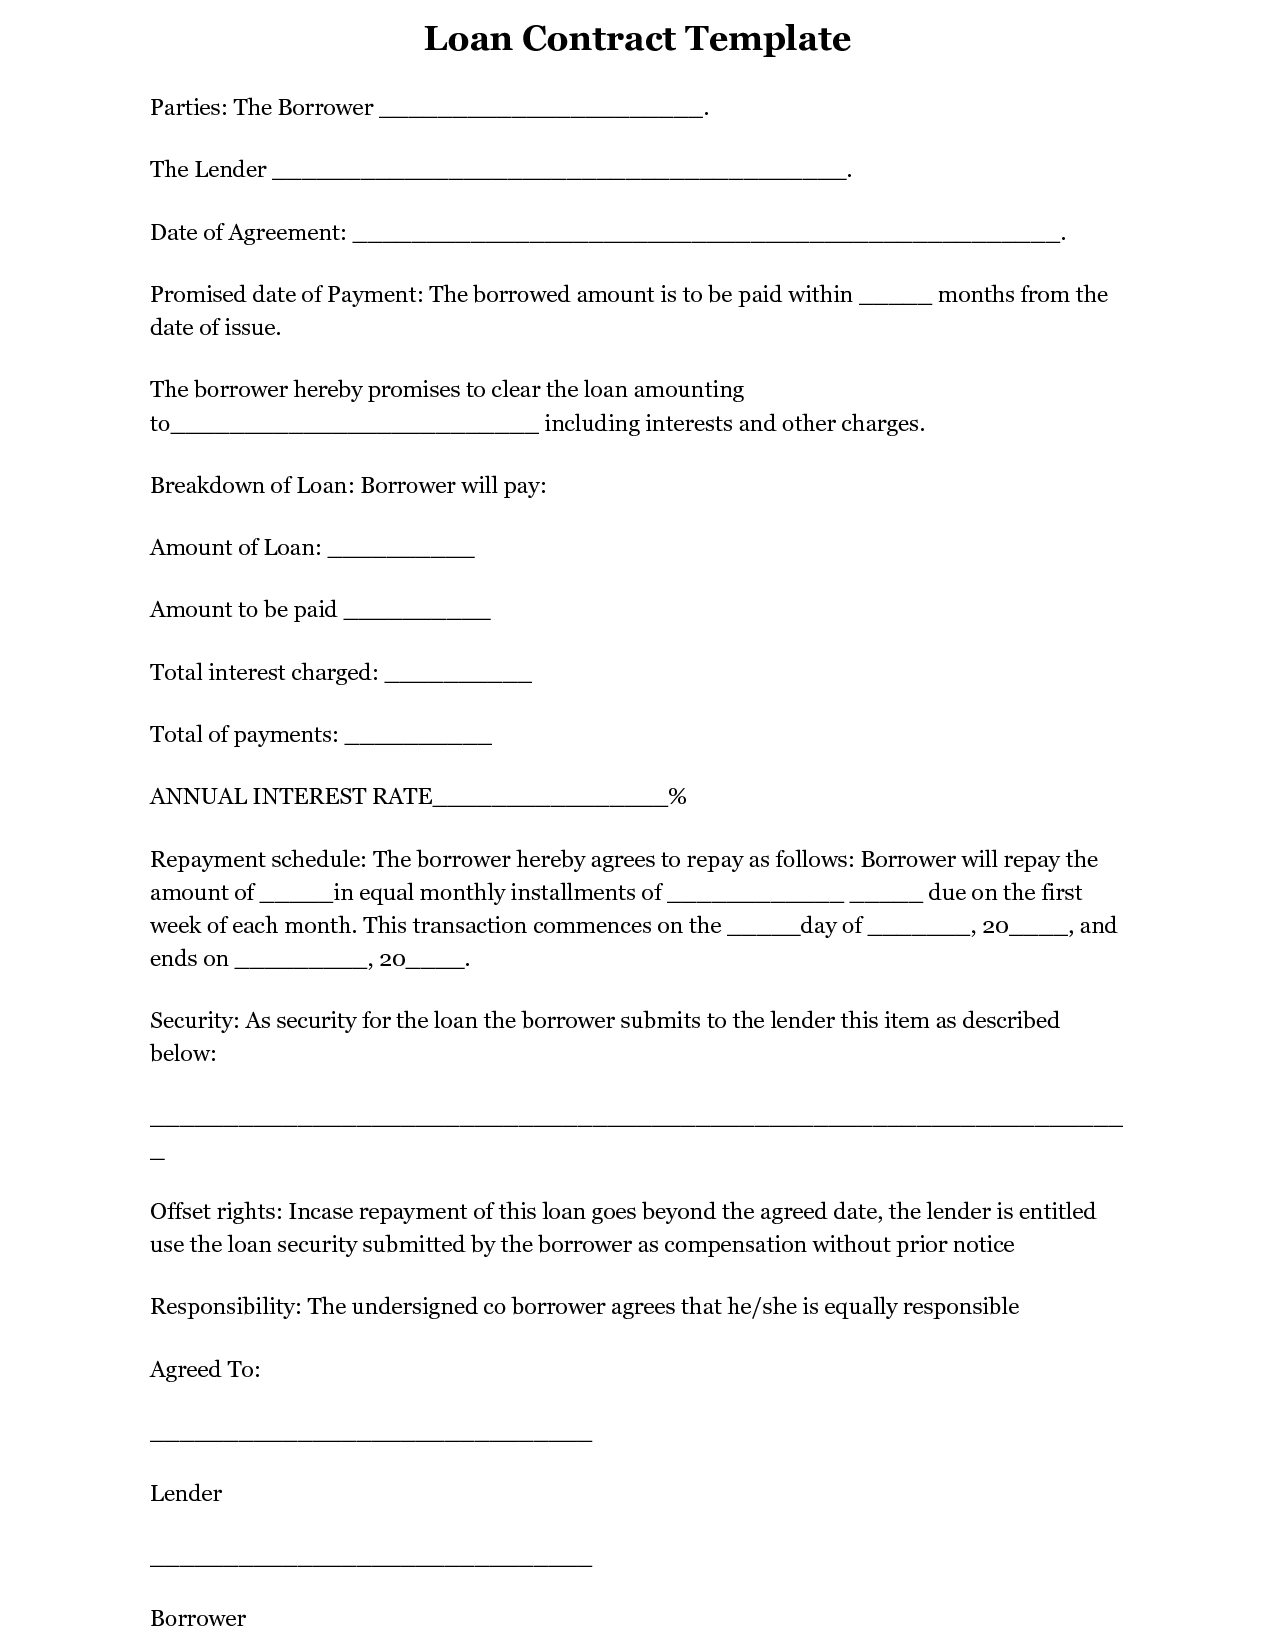 Terrific Blank Loan Contract Or Agreement Template Sample With Regard To Blank Loan Agreement Template